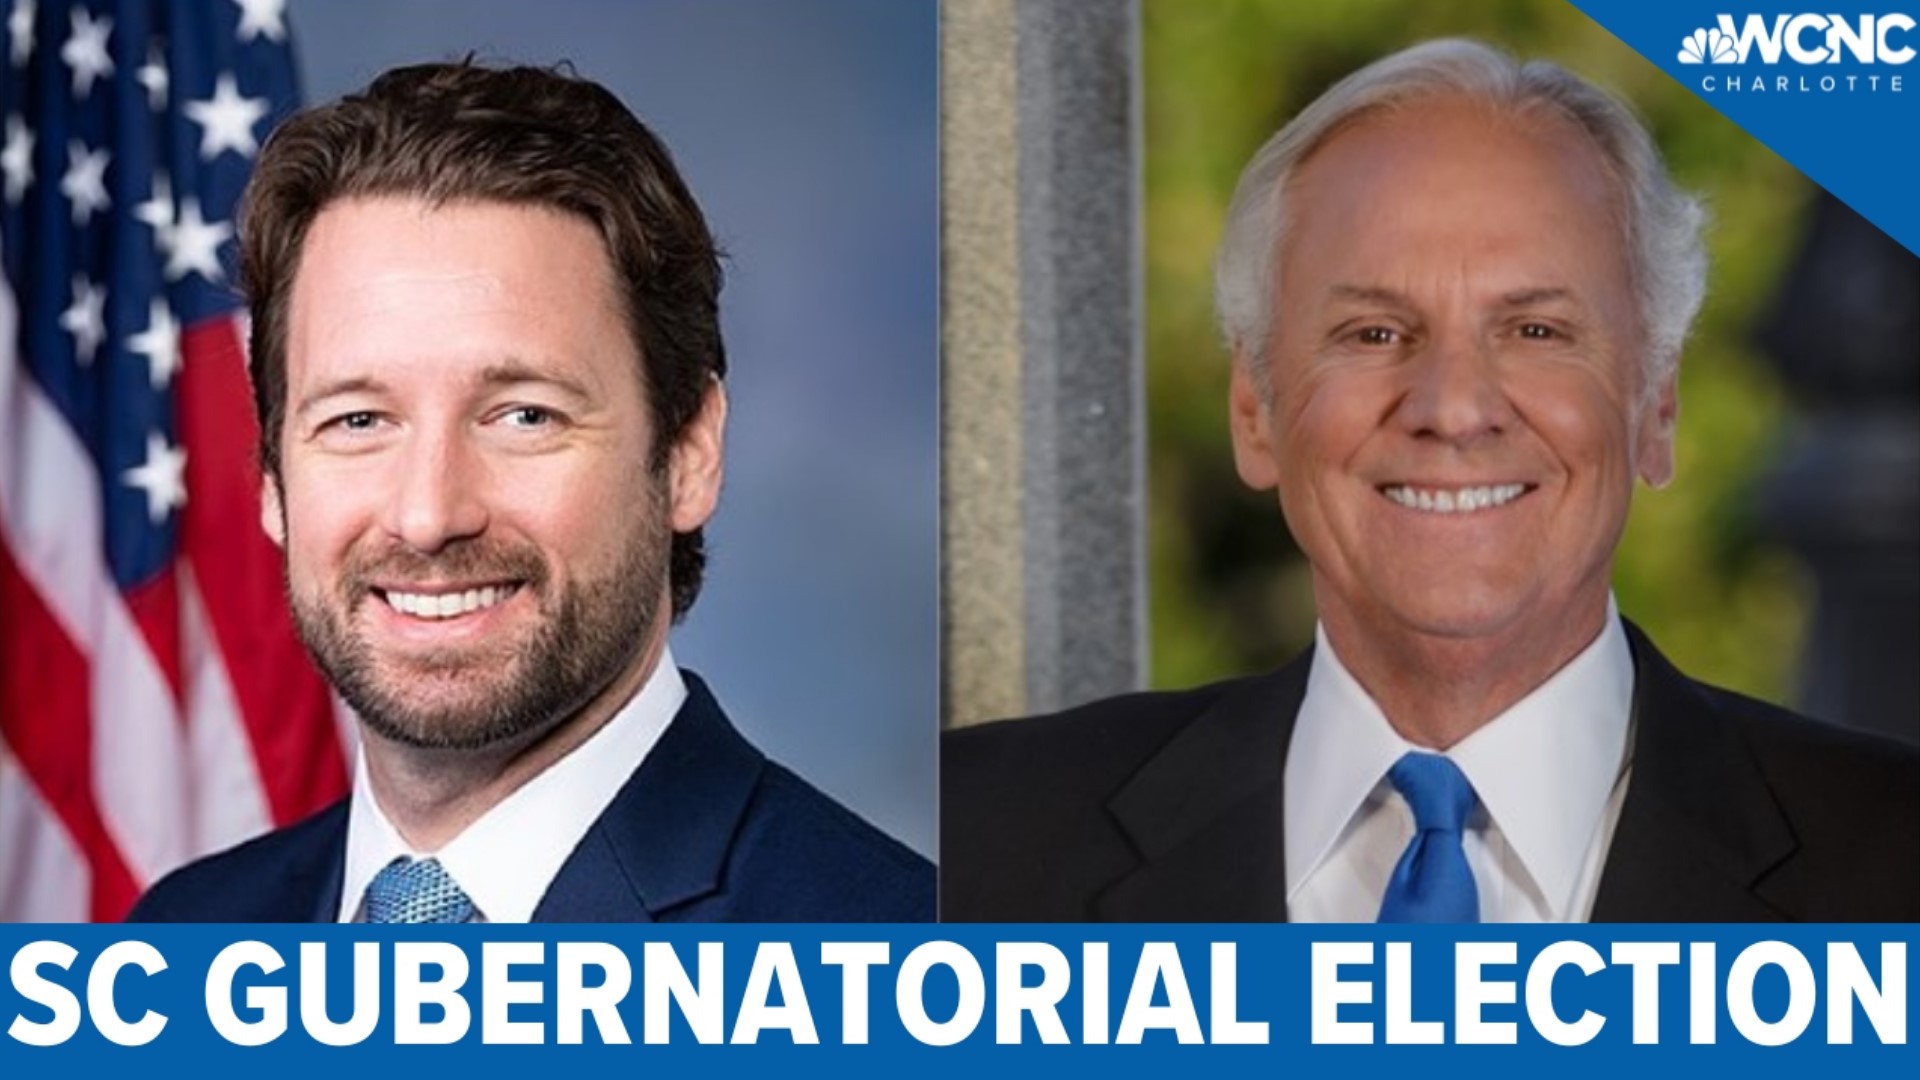 Gov. Henry McMaster (R) and Joe Cunningham (D) met last week to debate several topics on what they'd like to establish for South Carolinians.